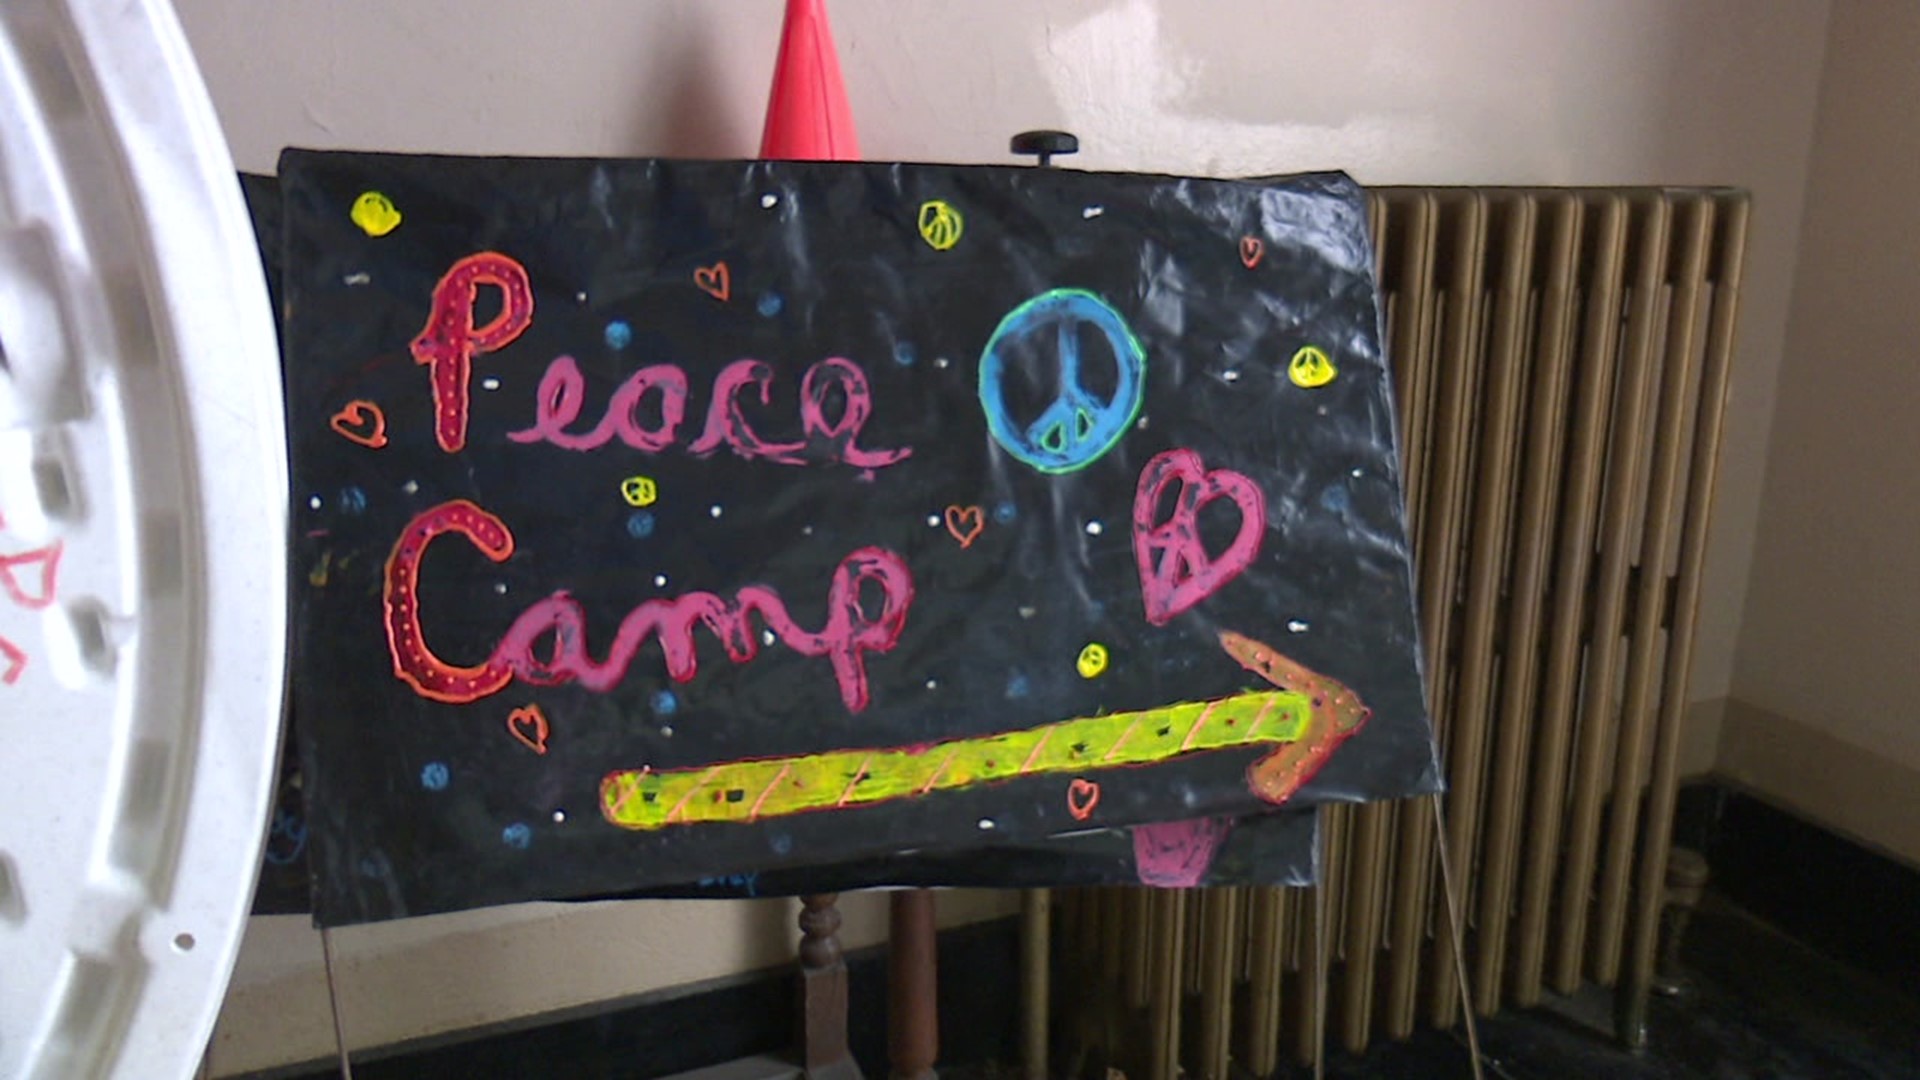 It's summer camp season, and while many kids will participate in sports or theater camps, one group in Wilkes-Barre is doing something a little different.